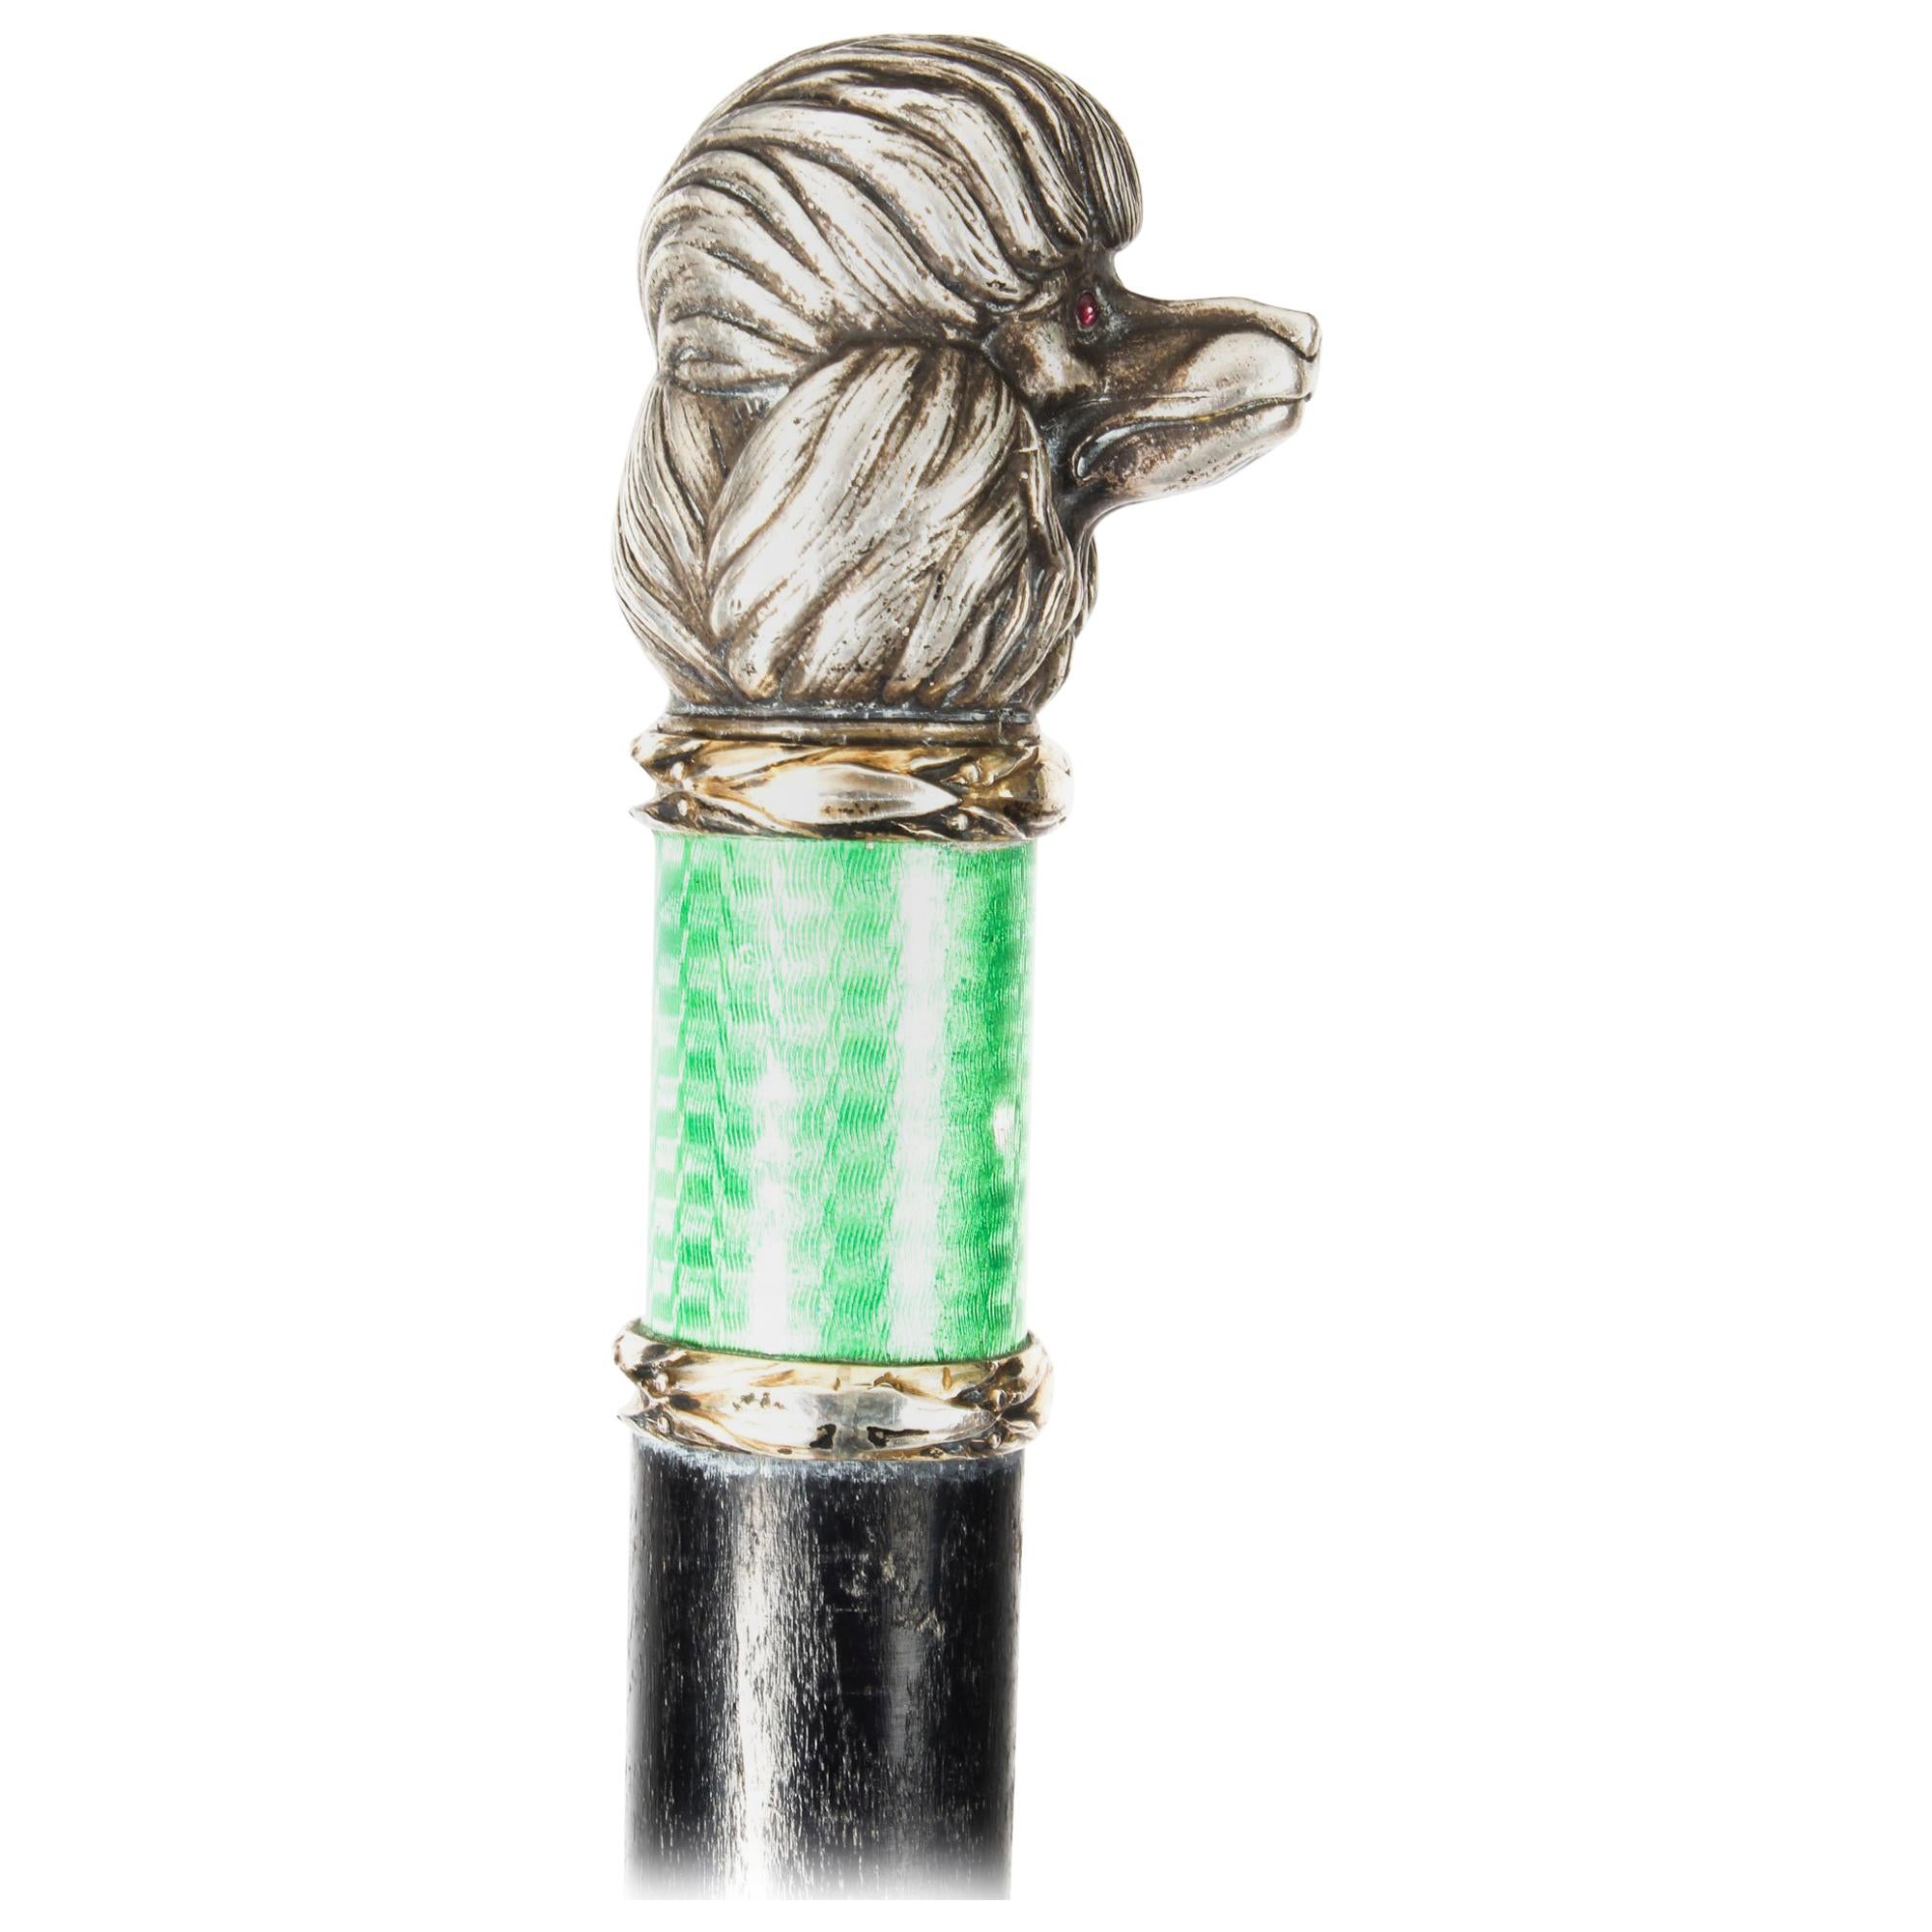 Antique Russian Silver and Enamel Walking Stick Cane, 19th Century